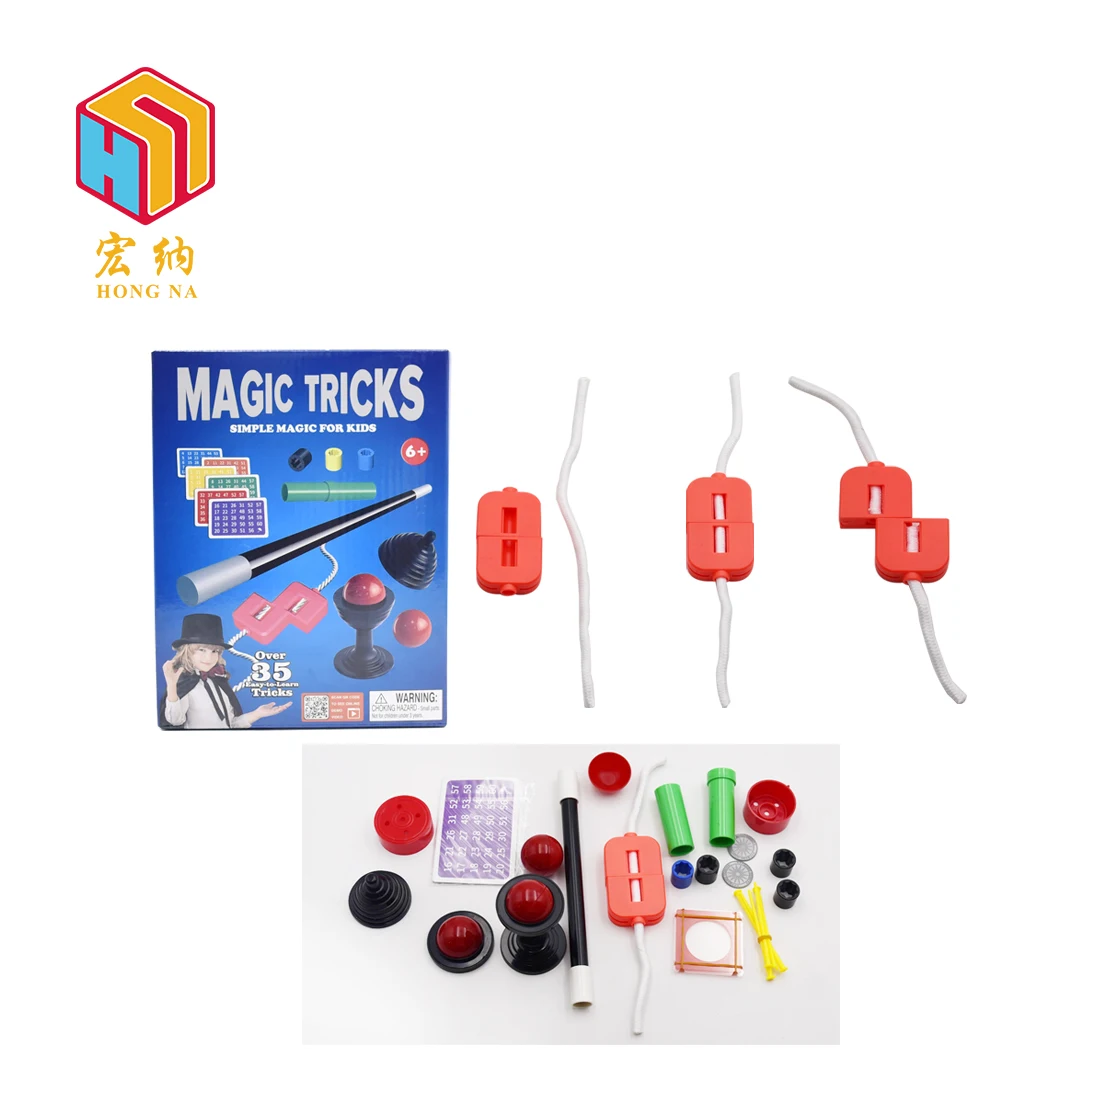 
brain education 35 ways kids simple game play suit magic trick toy  (1600222205499)